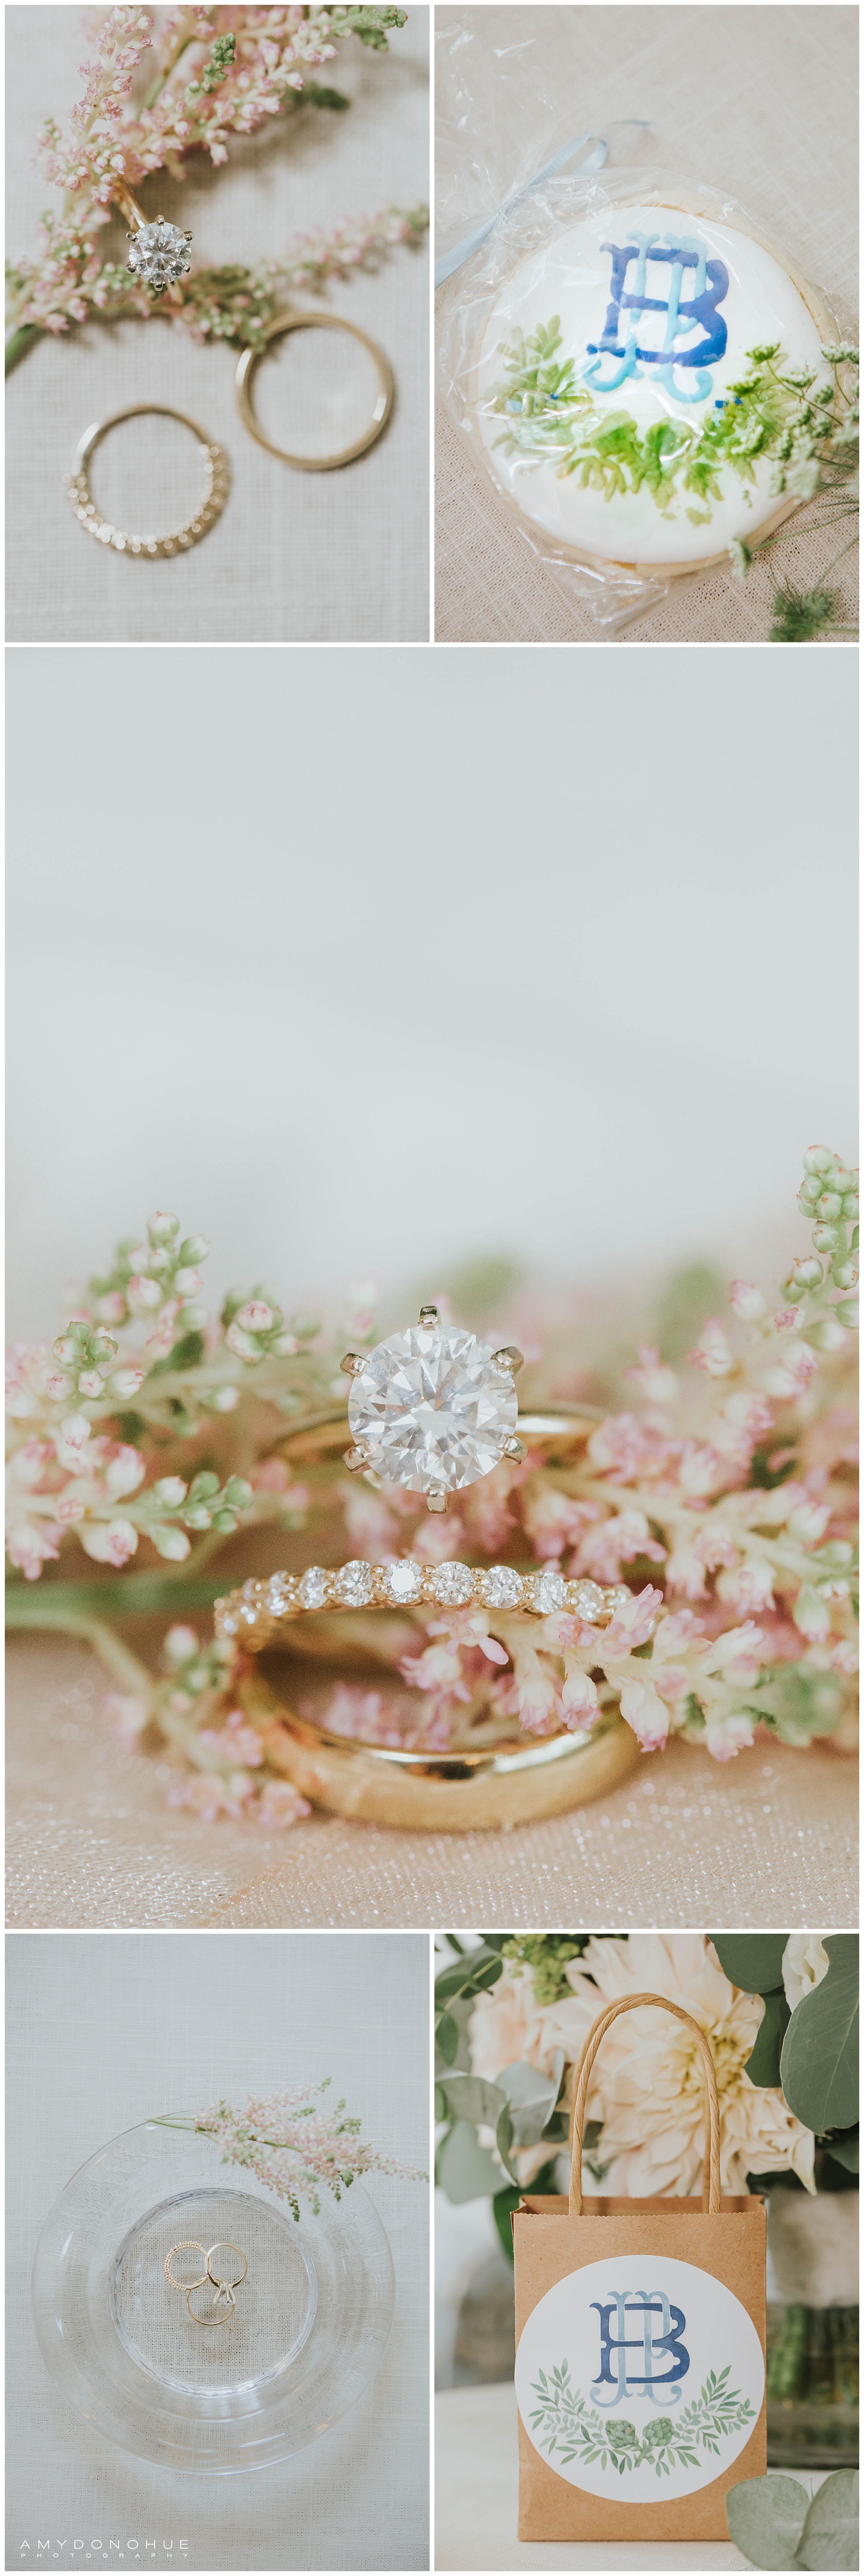 Wedding Ring Details | Vermont Wedding Photographer | © Amy Donohue Photography